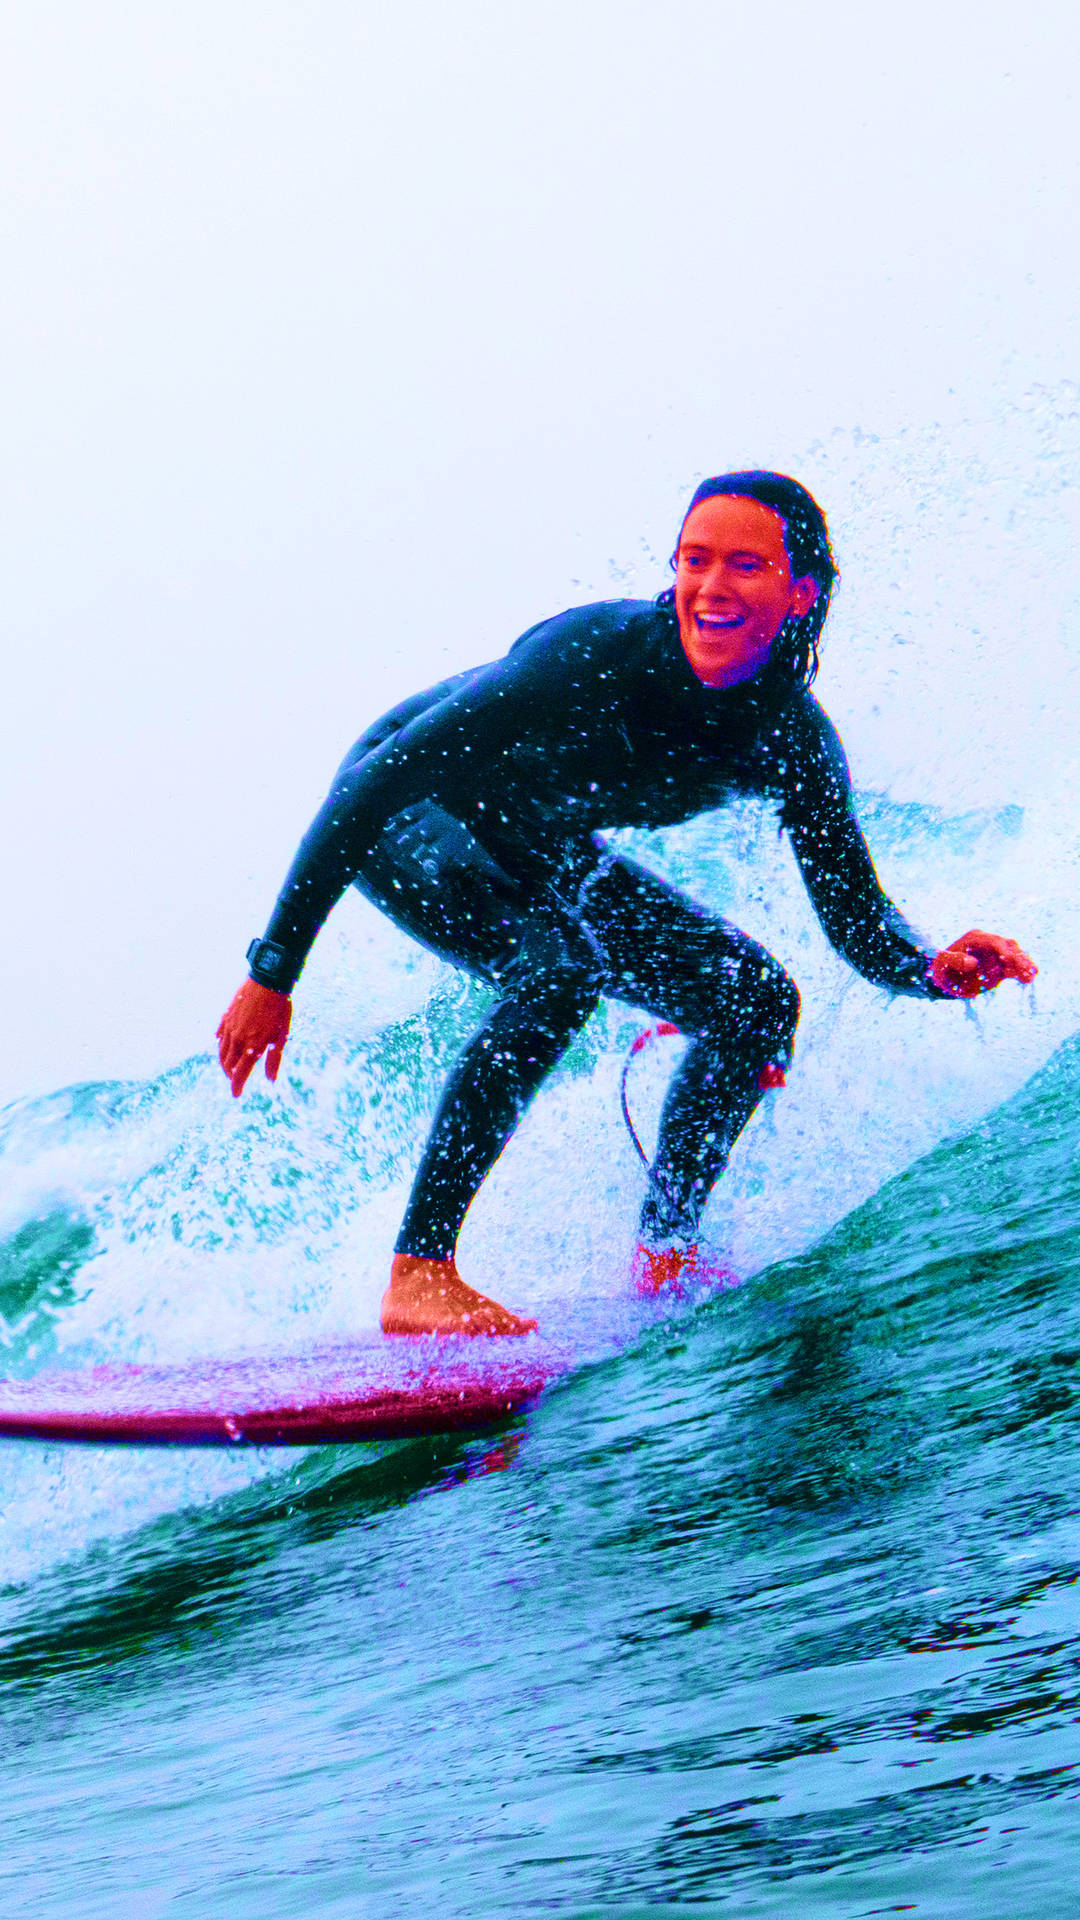 Girl Surfing With A Smile